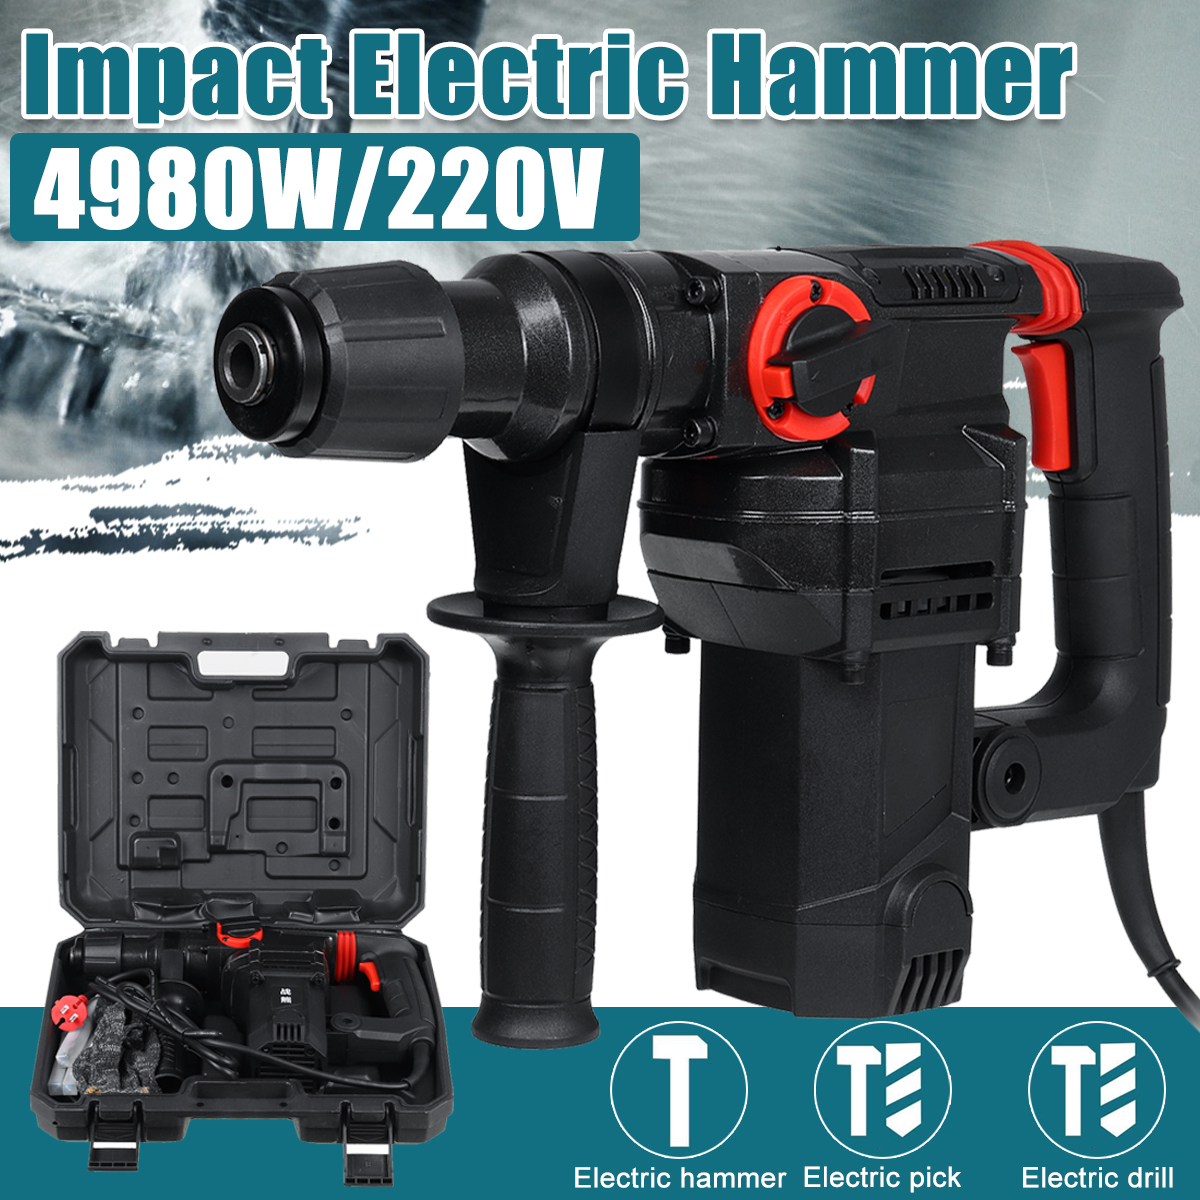 220V-1300W-3-in-1-Impact-Electric-Hammer-Drill-Electric-Rotary-Hammer-Perforator-Pick-Puncher-1806227-1